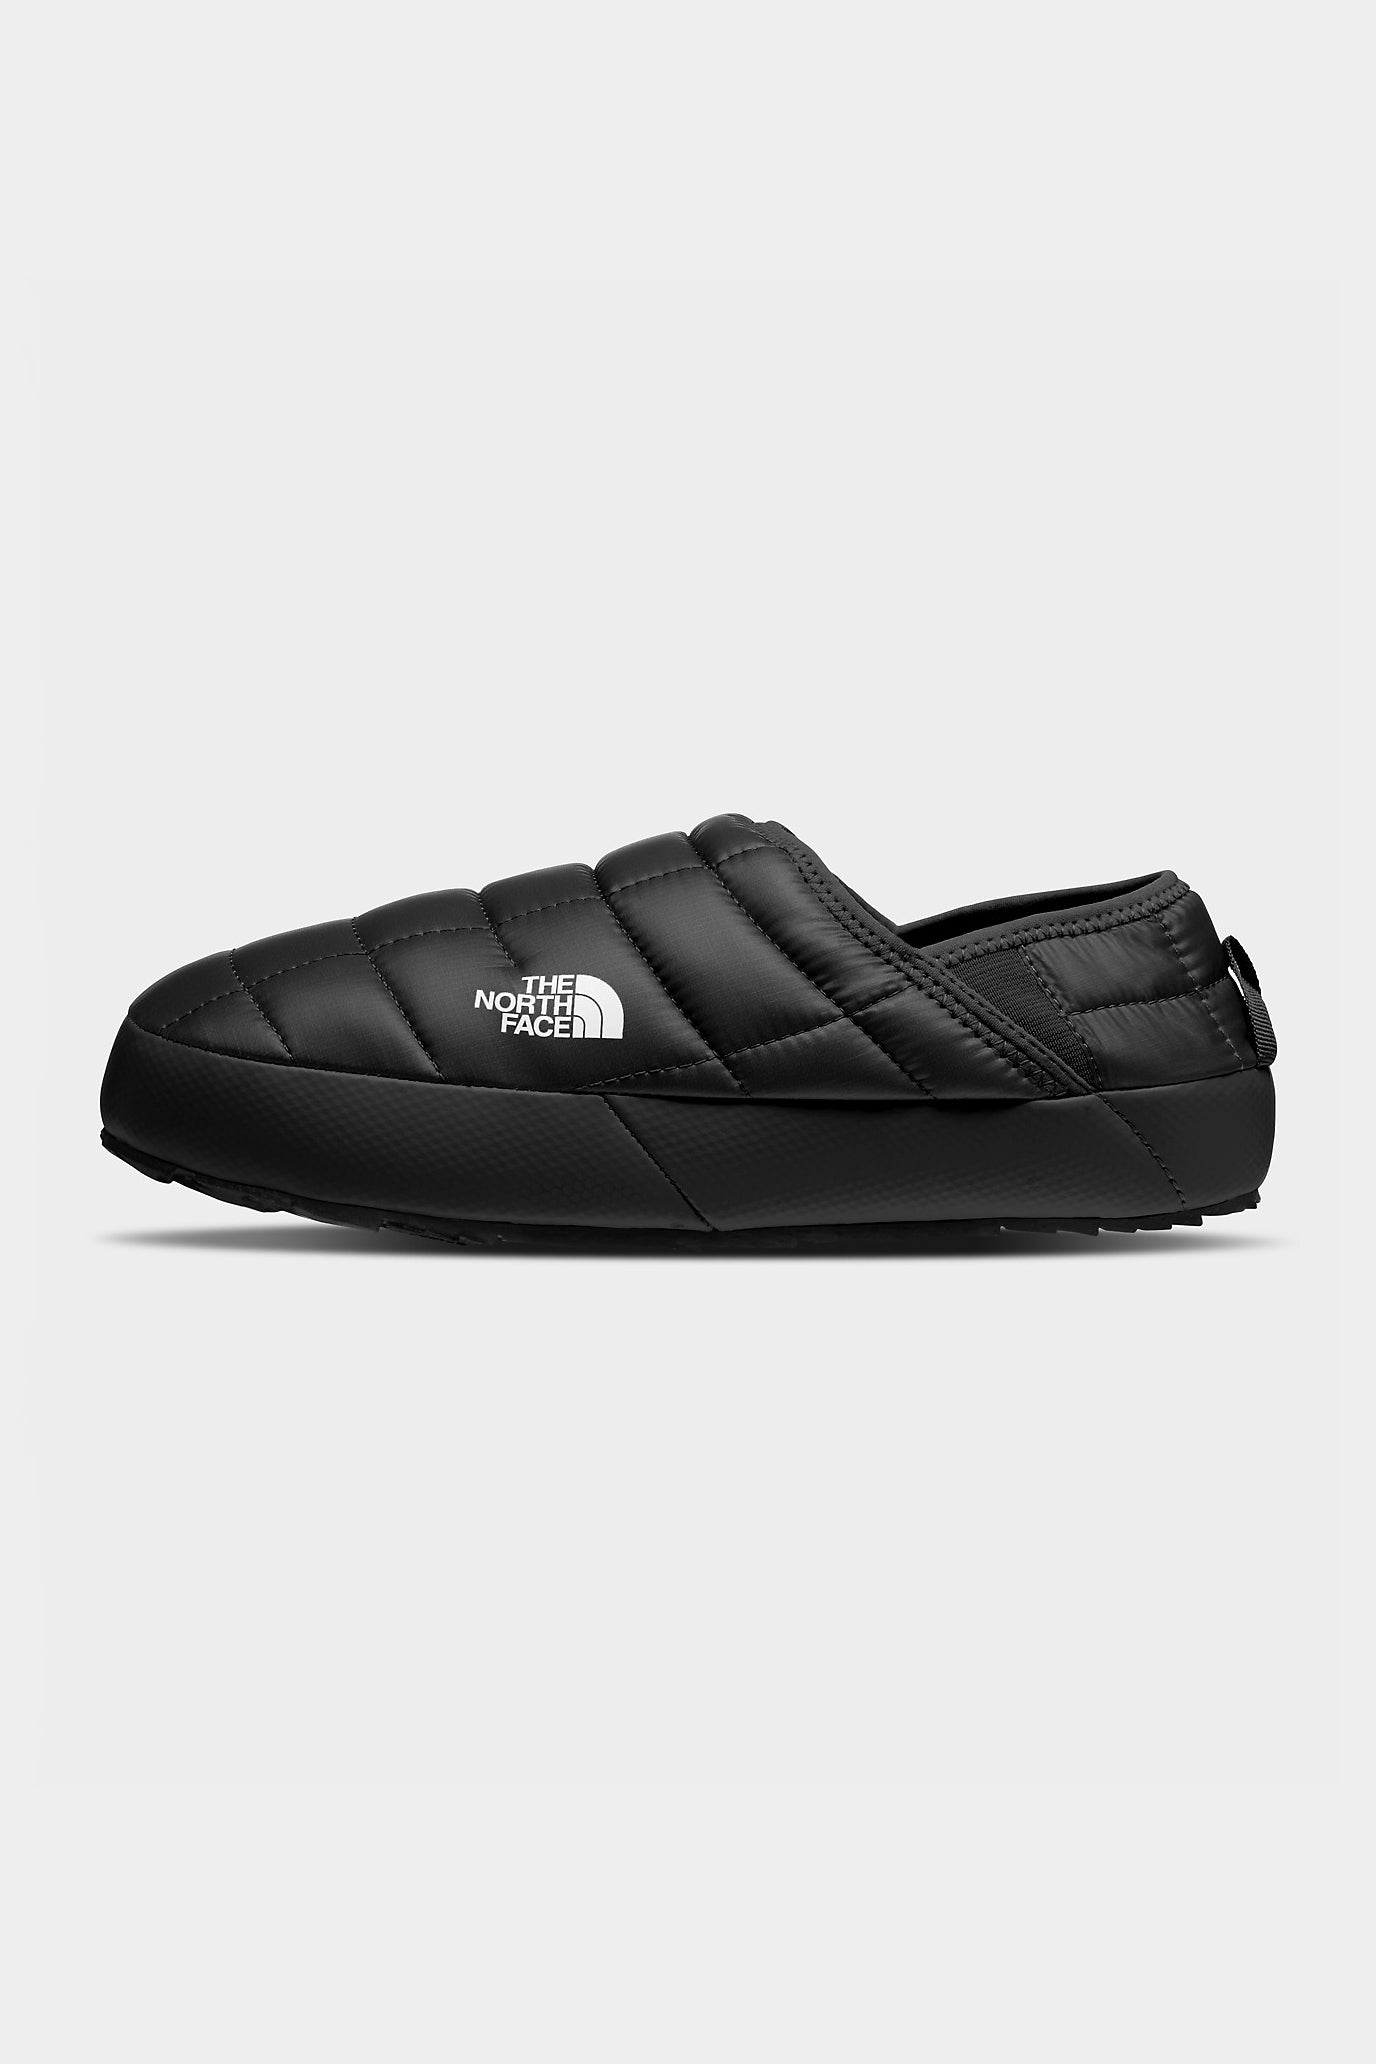    The-North-Face-ThermoBall-Traction-Mules-TNF-Black